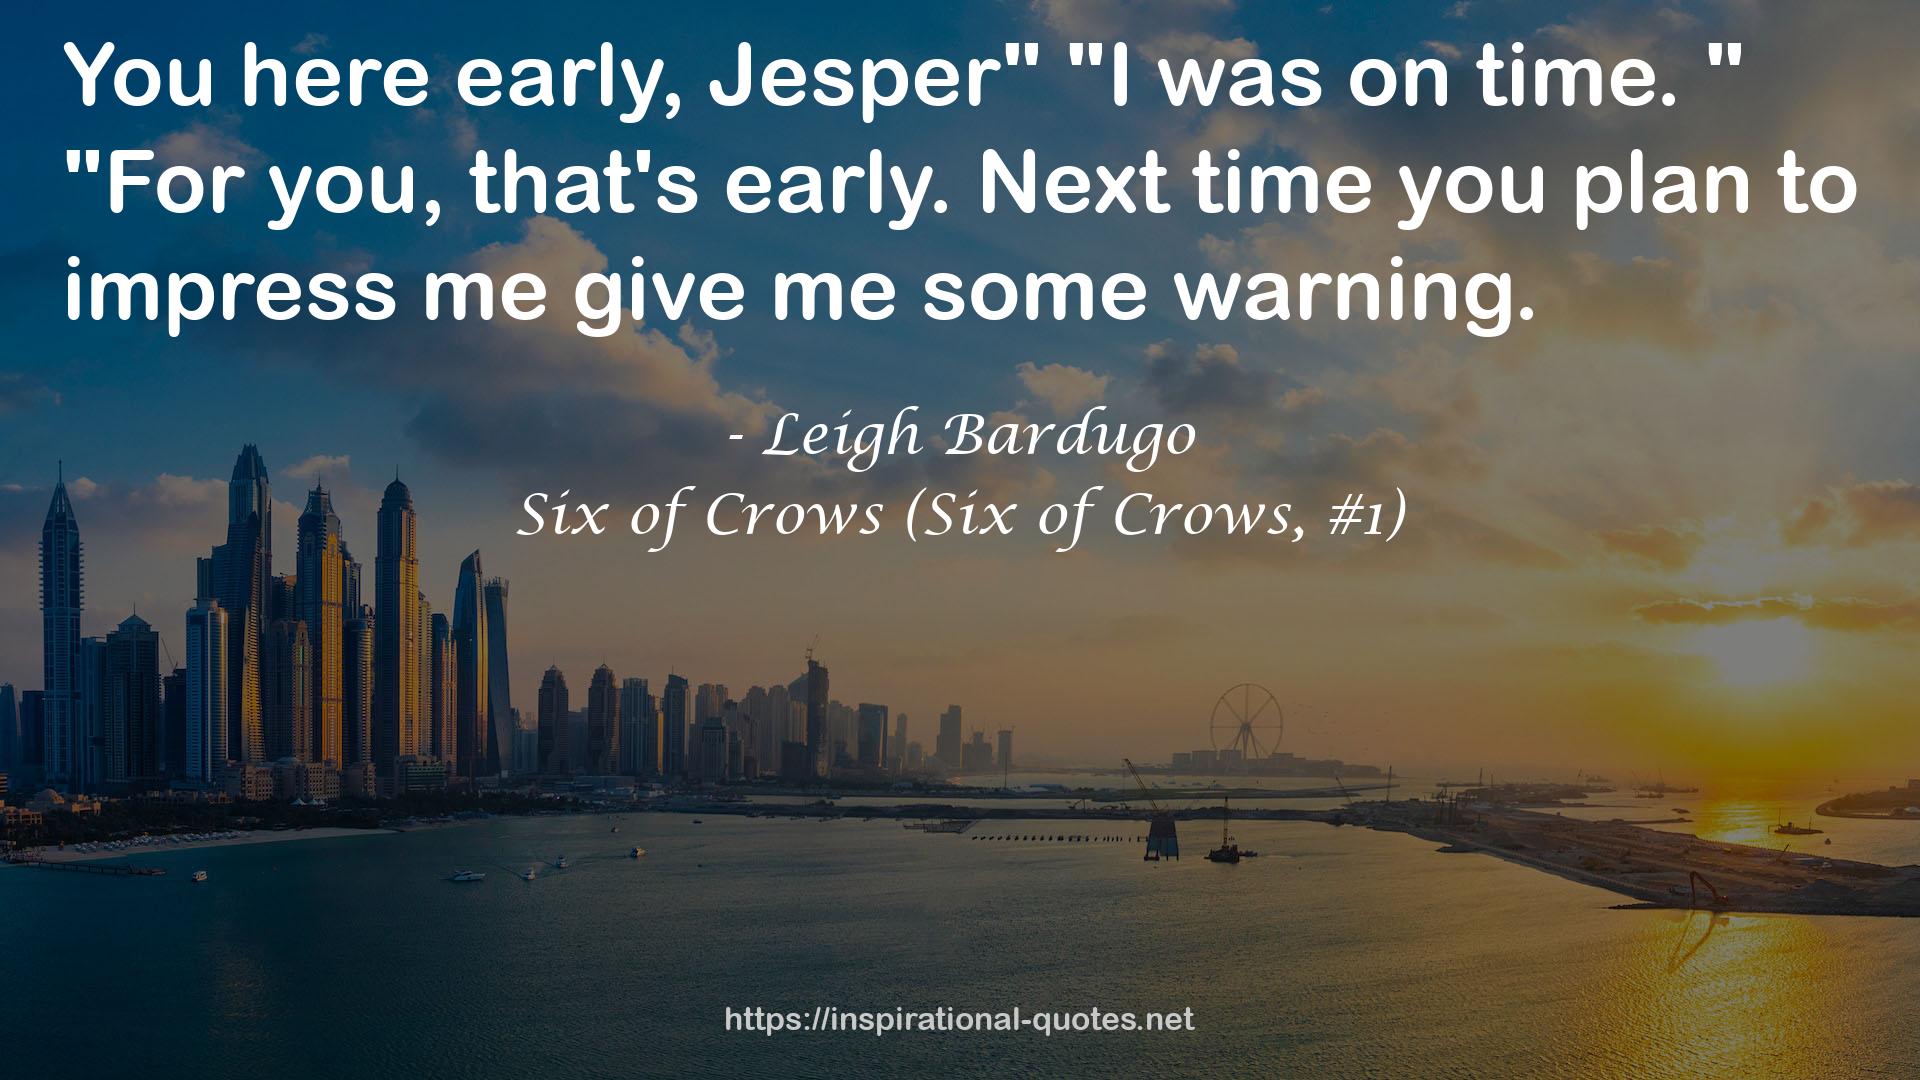 Six of Crows (Six of Crows, #1) QUOTES